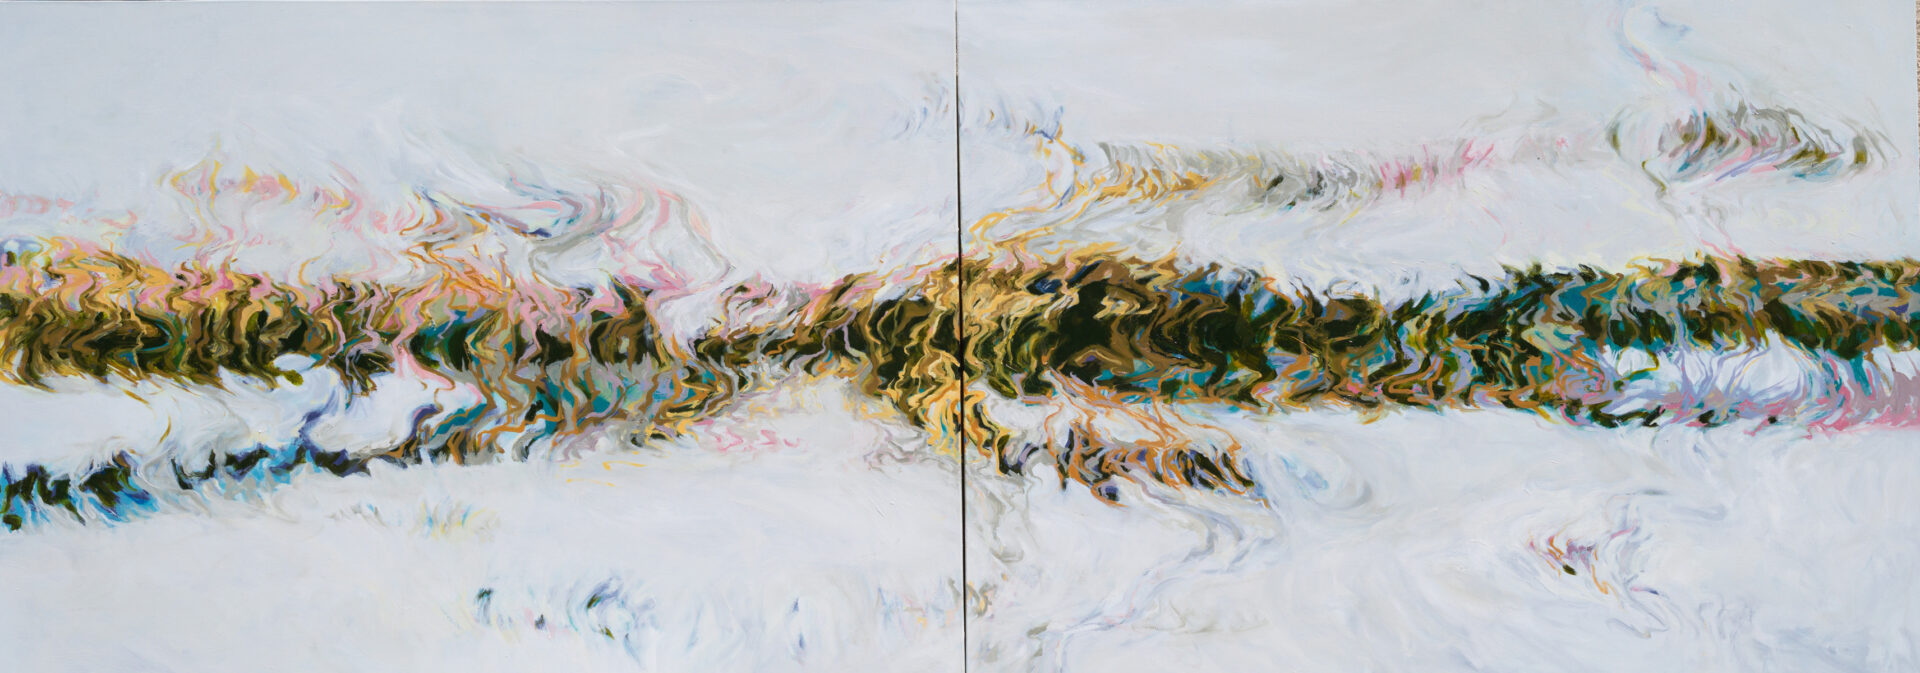 Ten Thousand Blessings
36”h x 96”w Diptych, Oil on Canvas